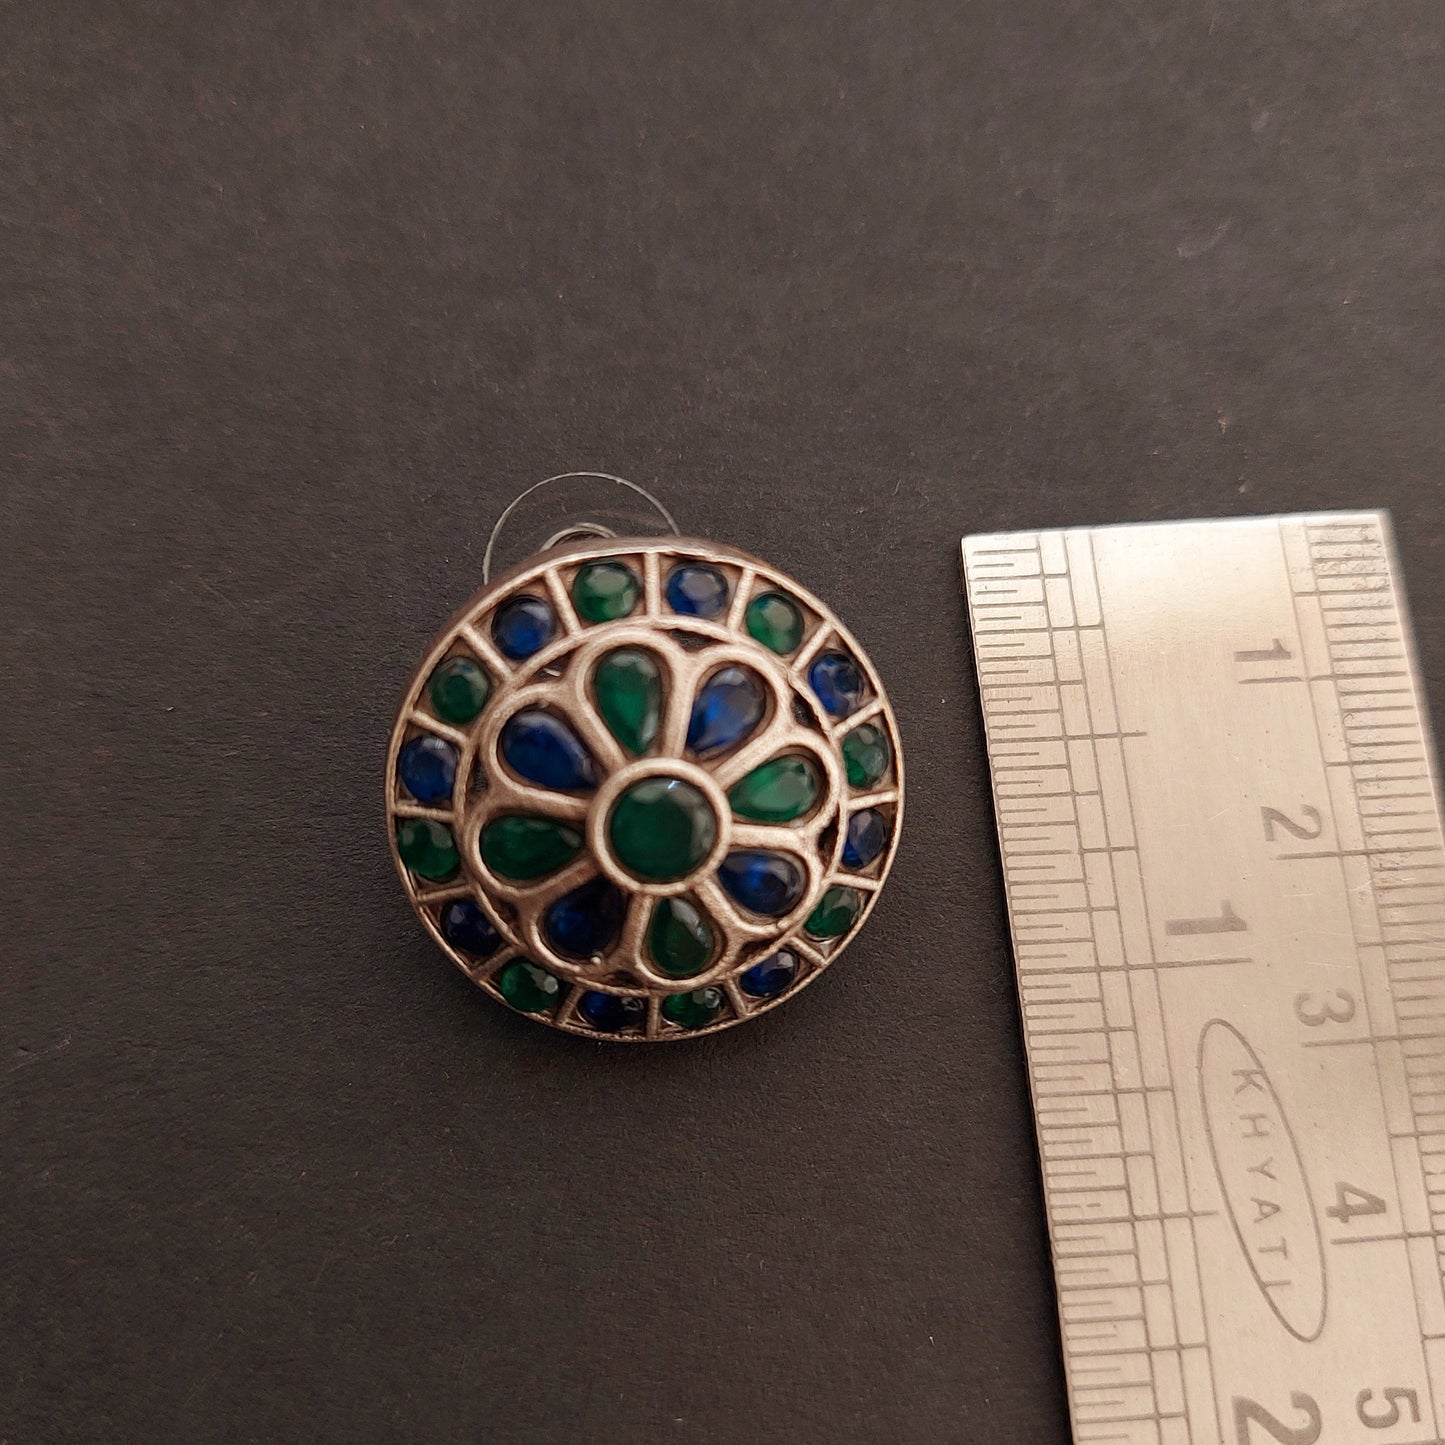 Stone Studded Silver Look alike Round Studs - Peacock Blue and Green